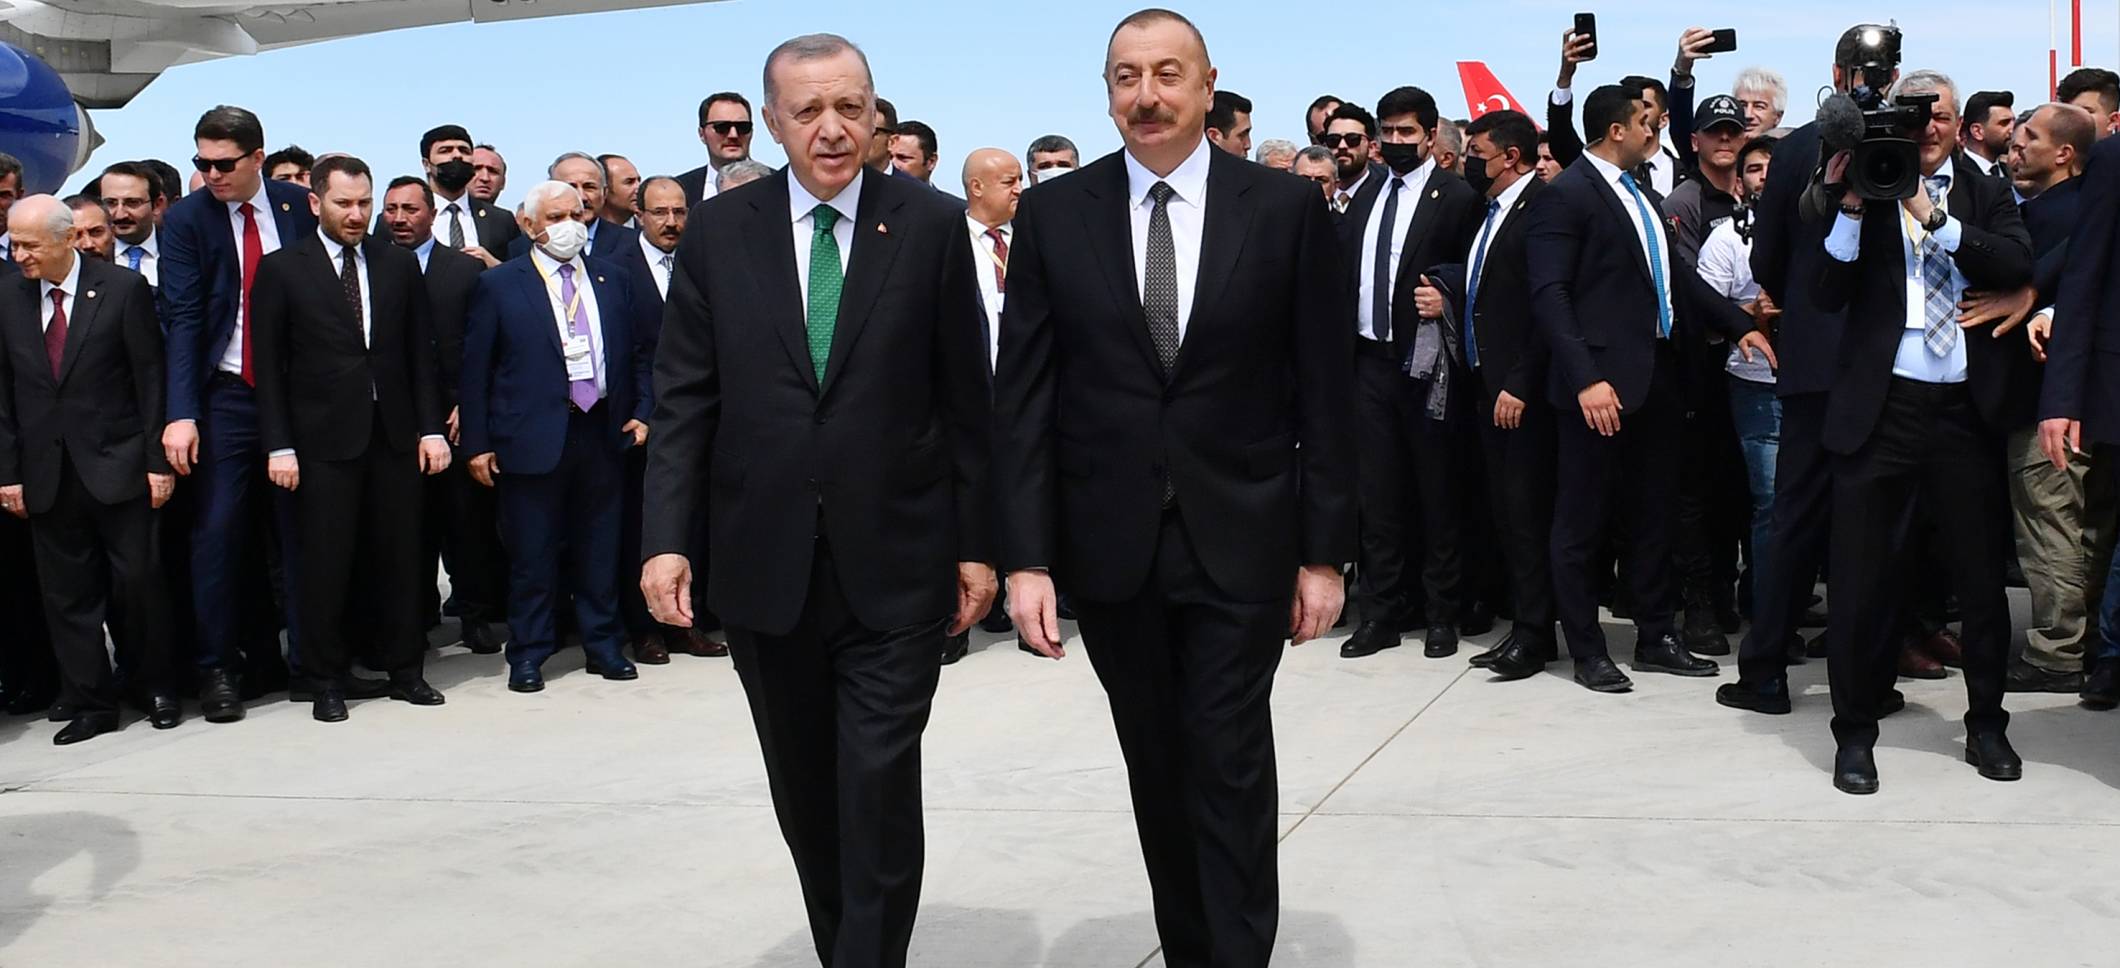 Azerbaijani and Turkish presidents attended the opening ceremony of the Rize-Artvin Airport